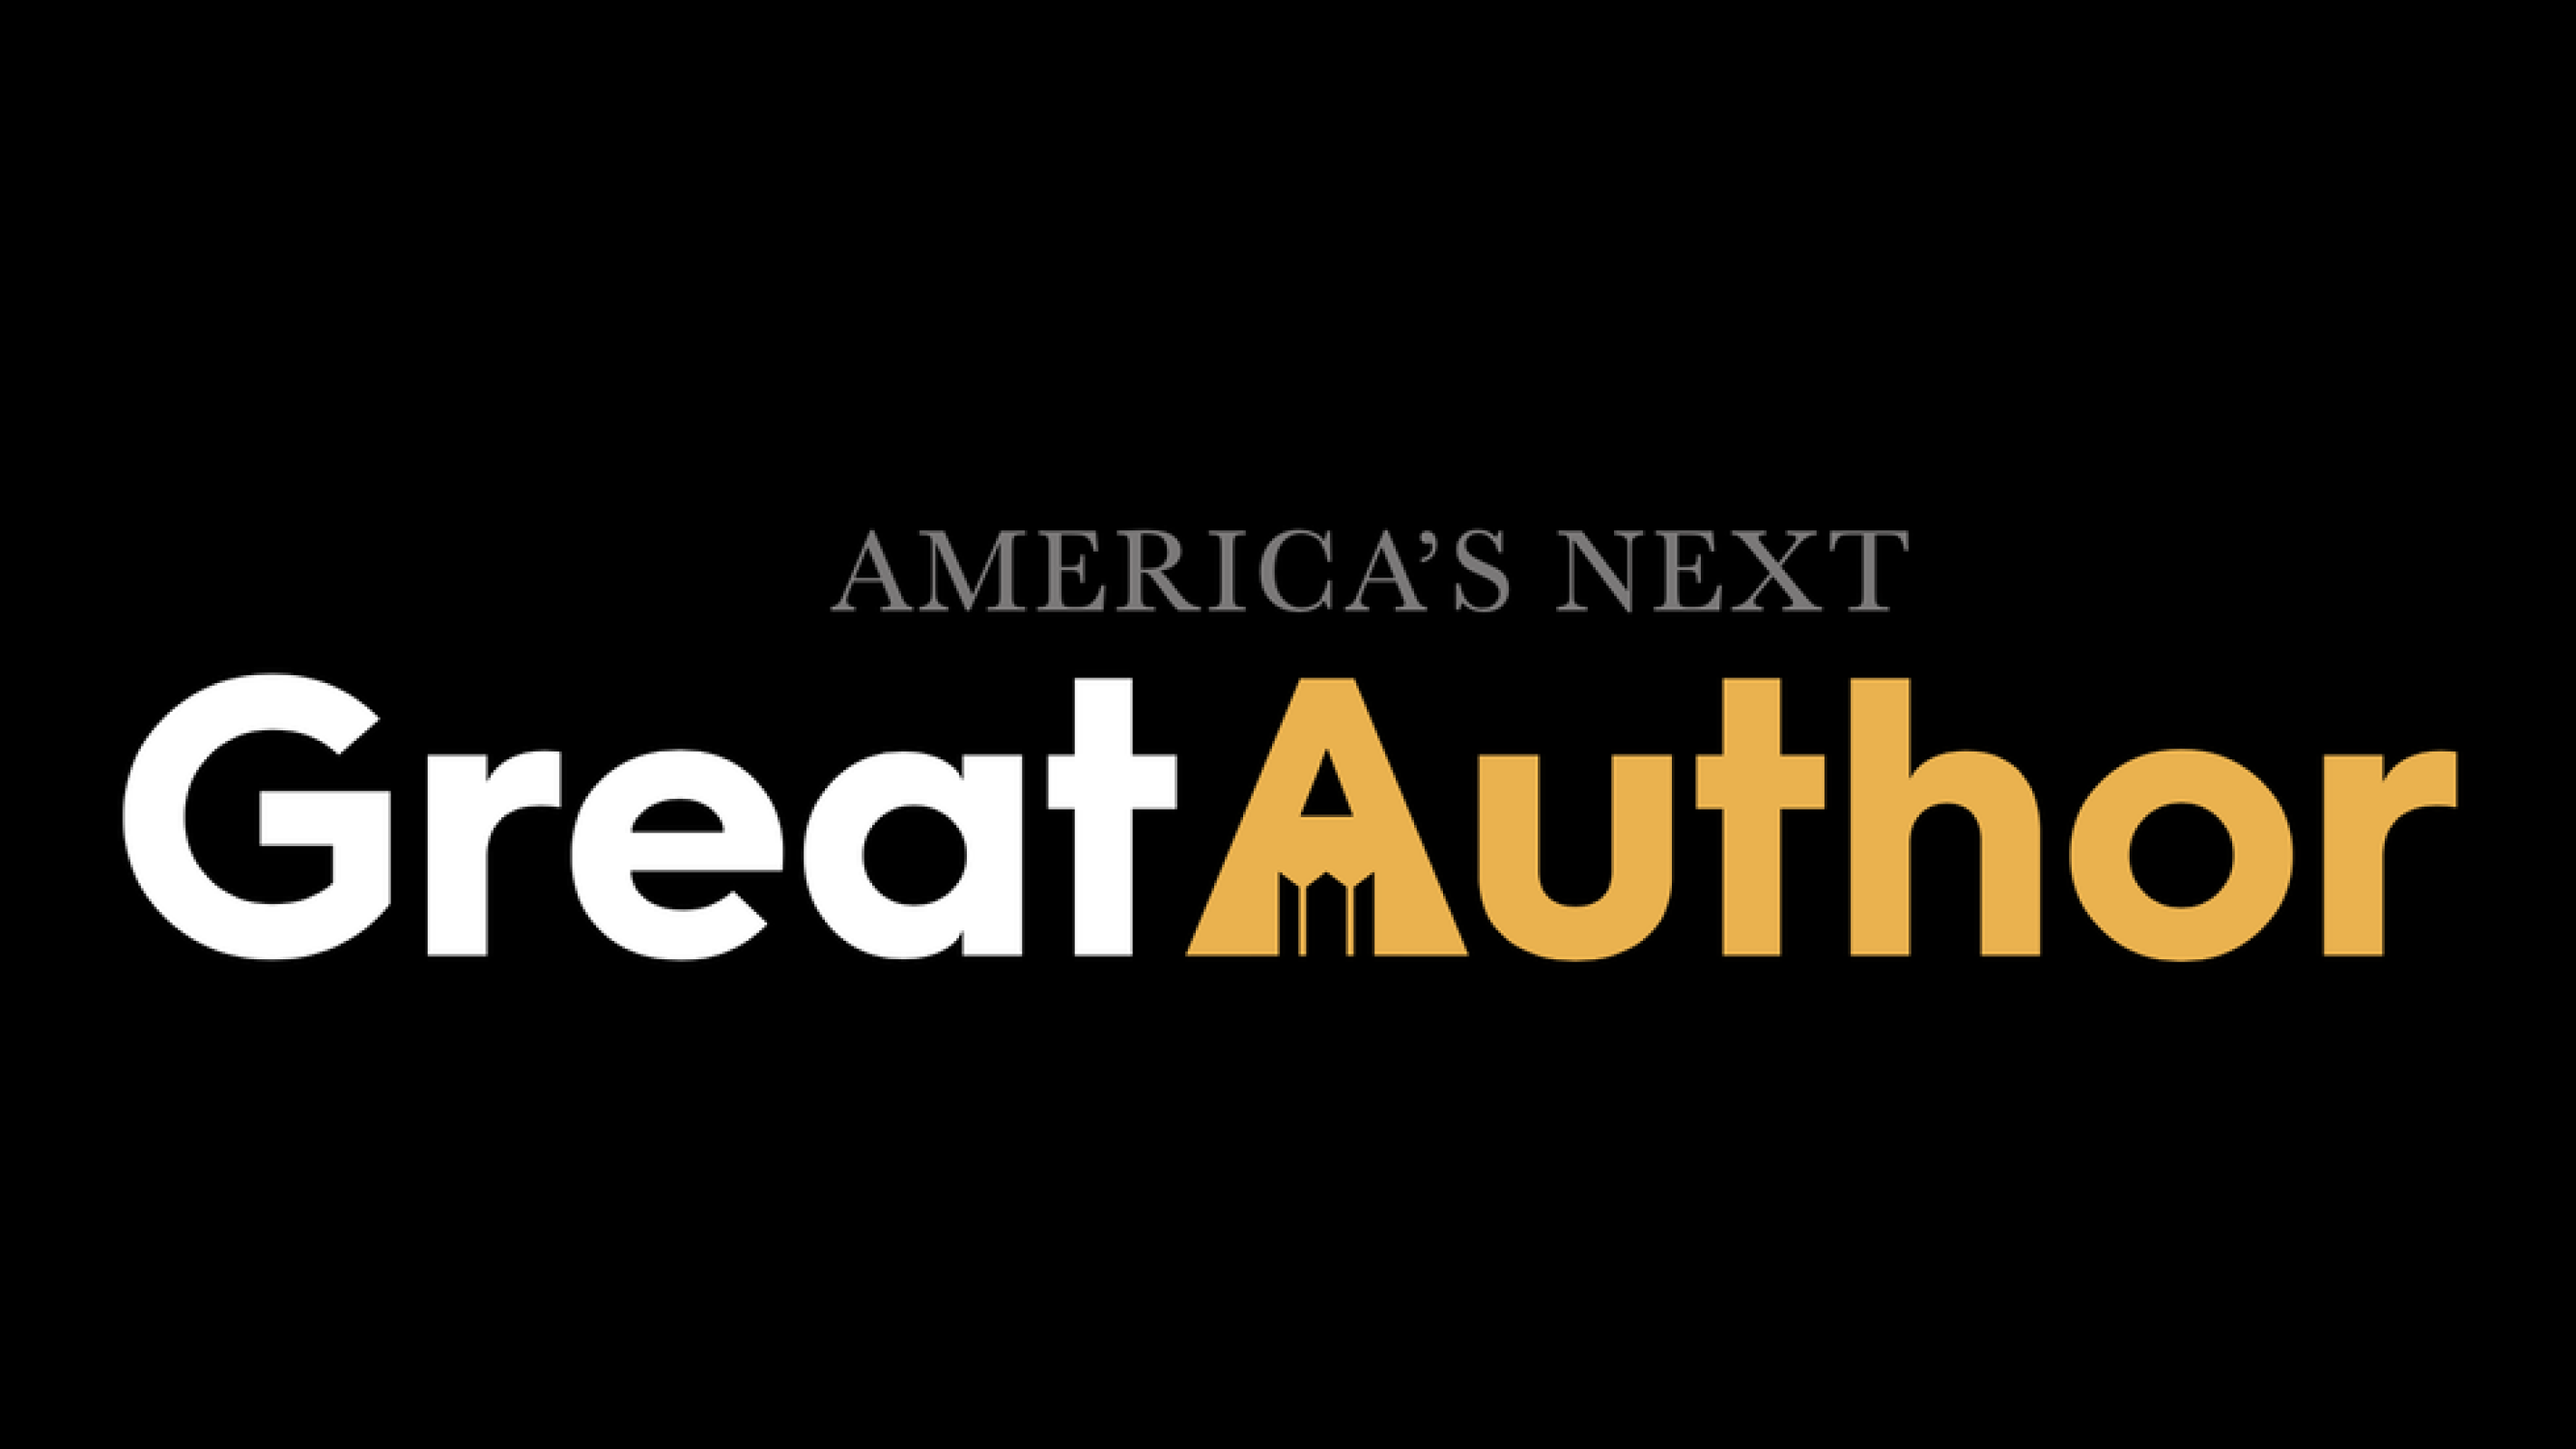 What Is America's Next Great Author?